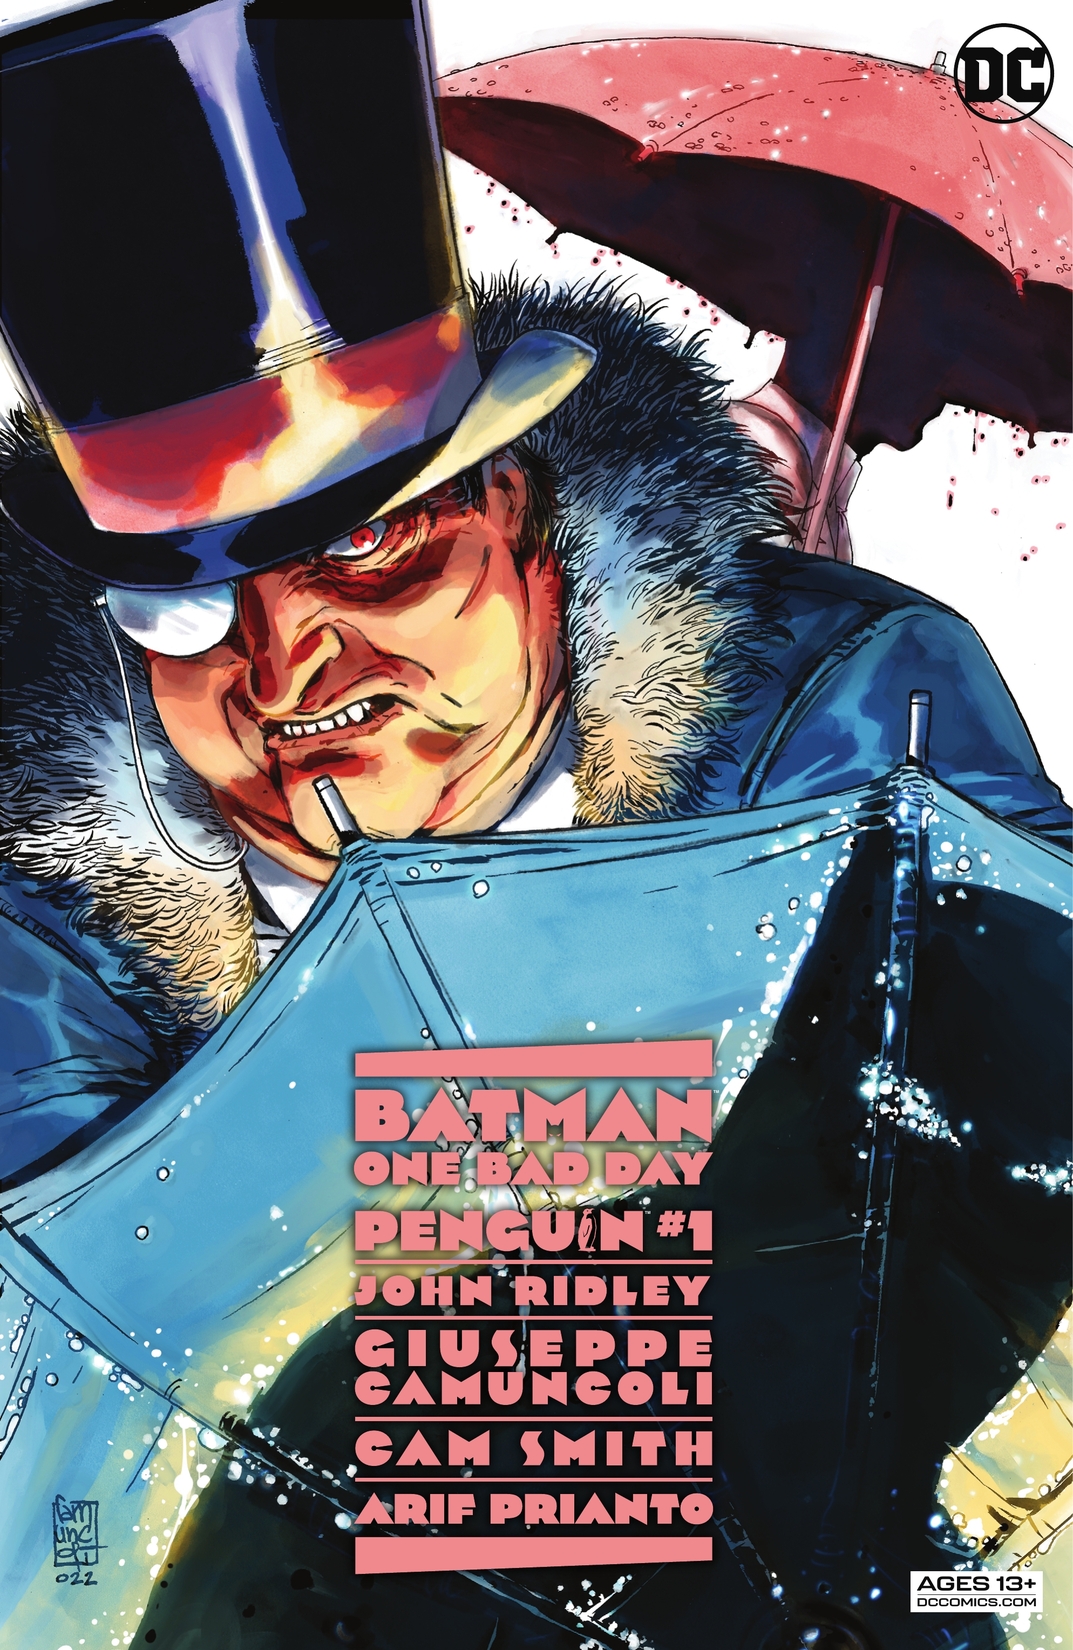 Batman - One Bad Day: Penguin #1 preview images